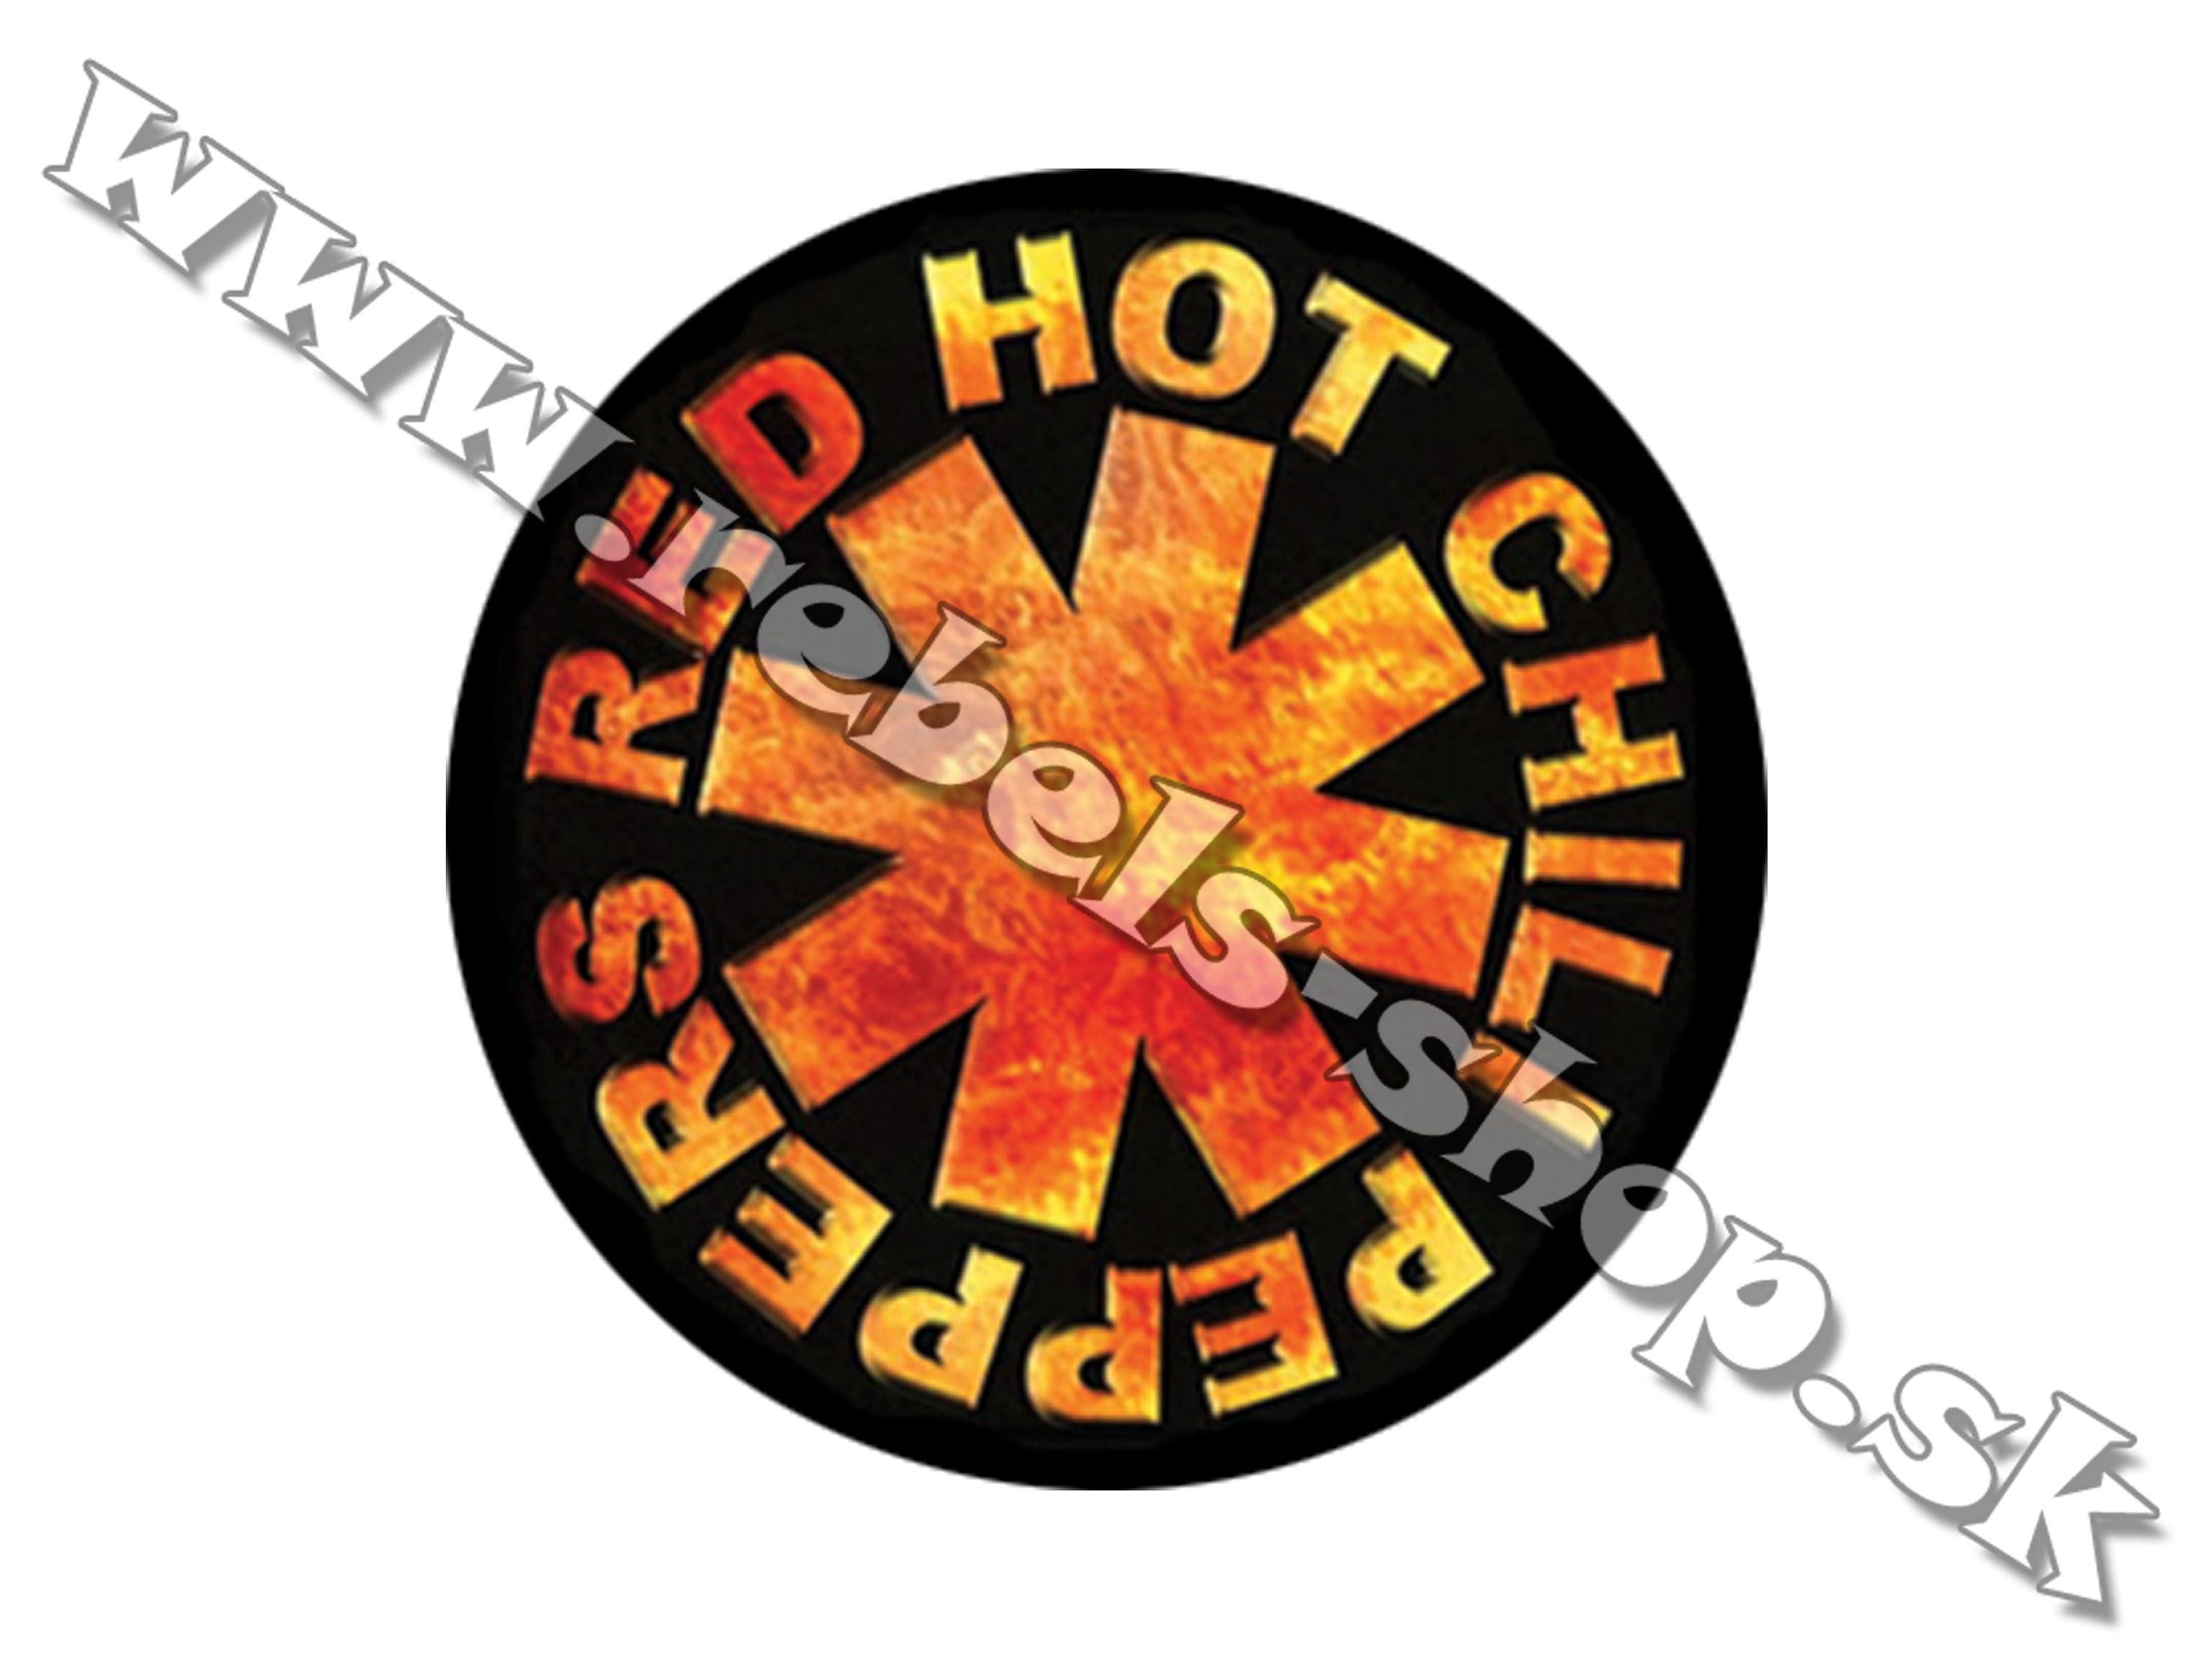 Odznak "Red Hot Chili Peppers"